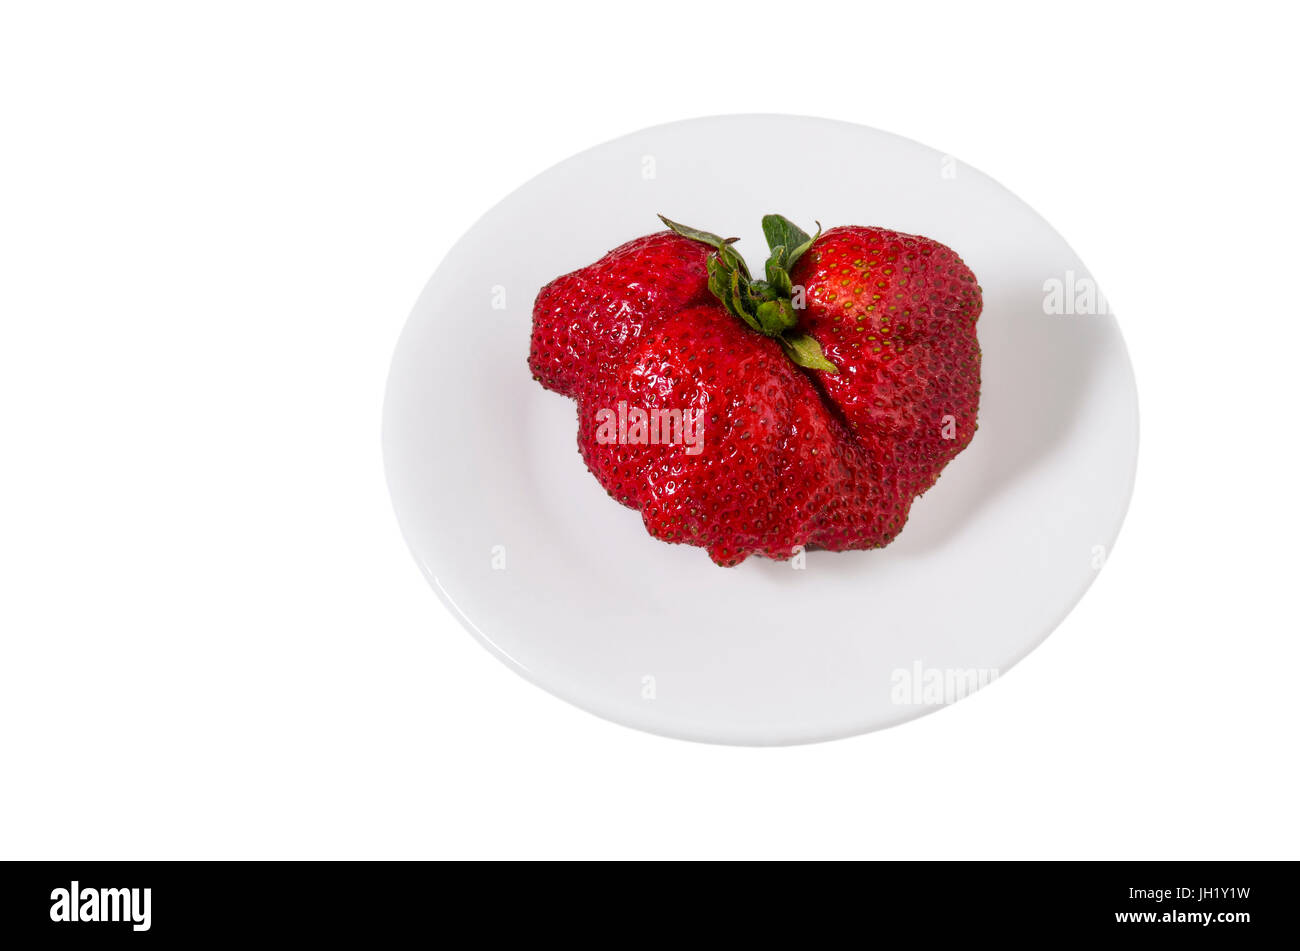 Single heart-shaped strawberry isolated on a white dish. Stock Photo